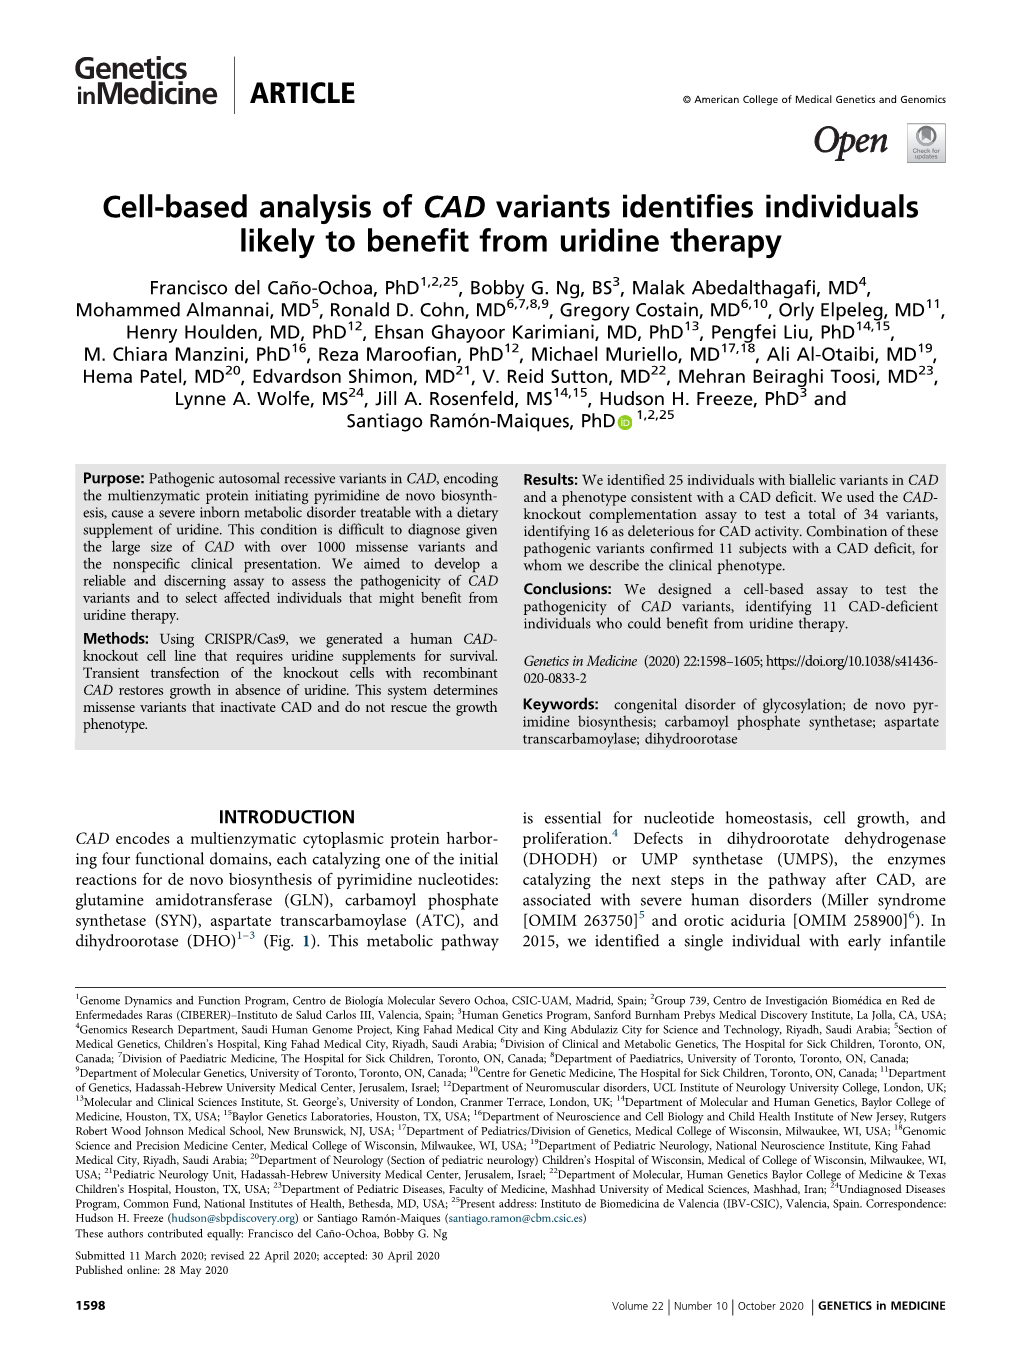 Cell-Based Analysis of CAD Variants Identifies Individuals Likely to Benefit from Uridine Therapy